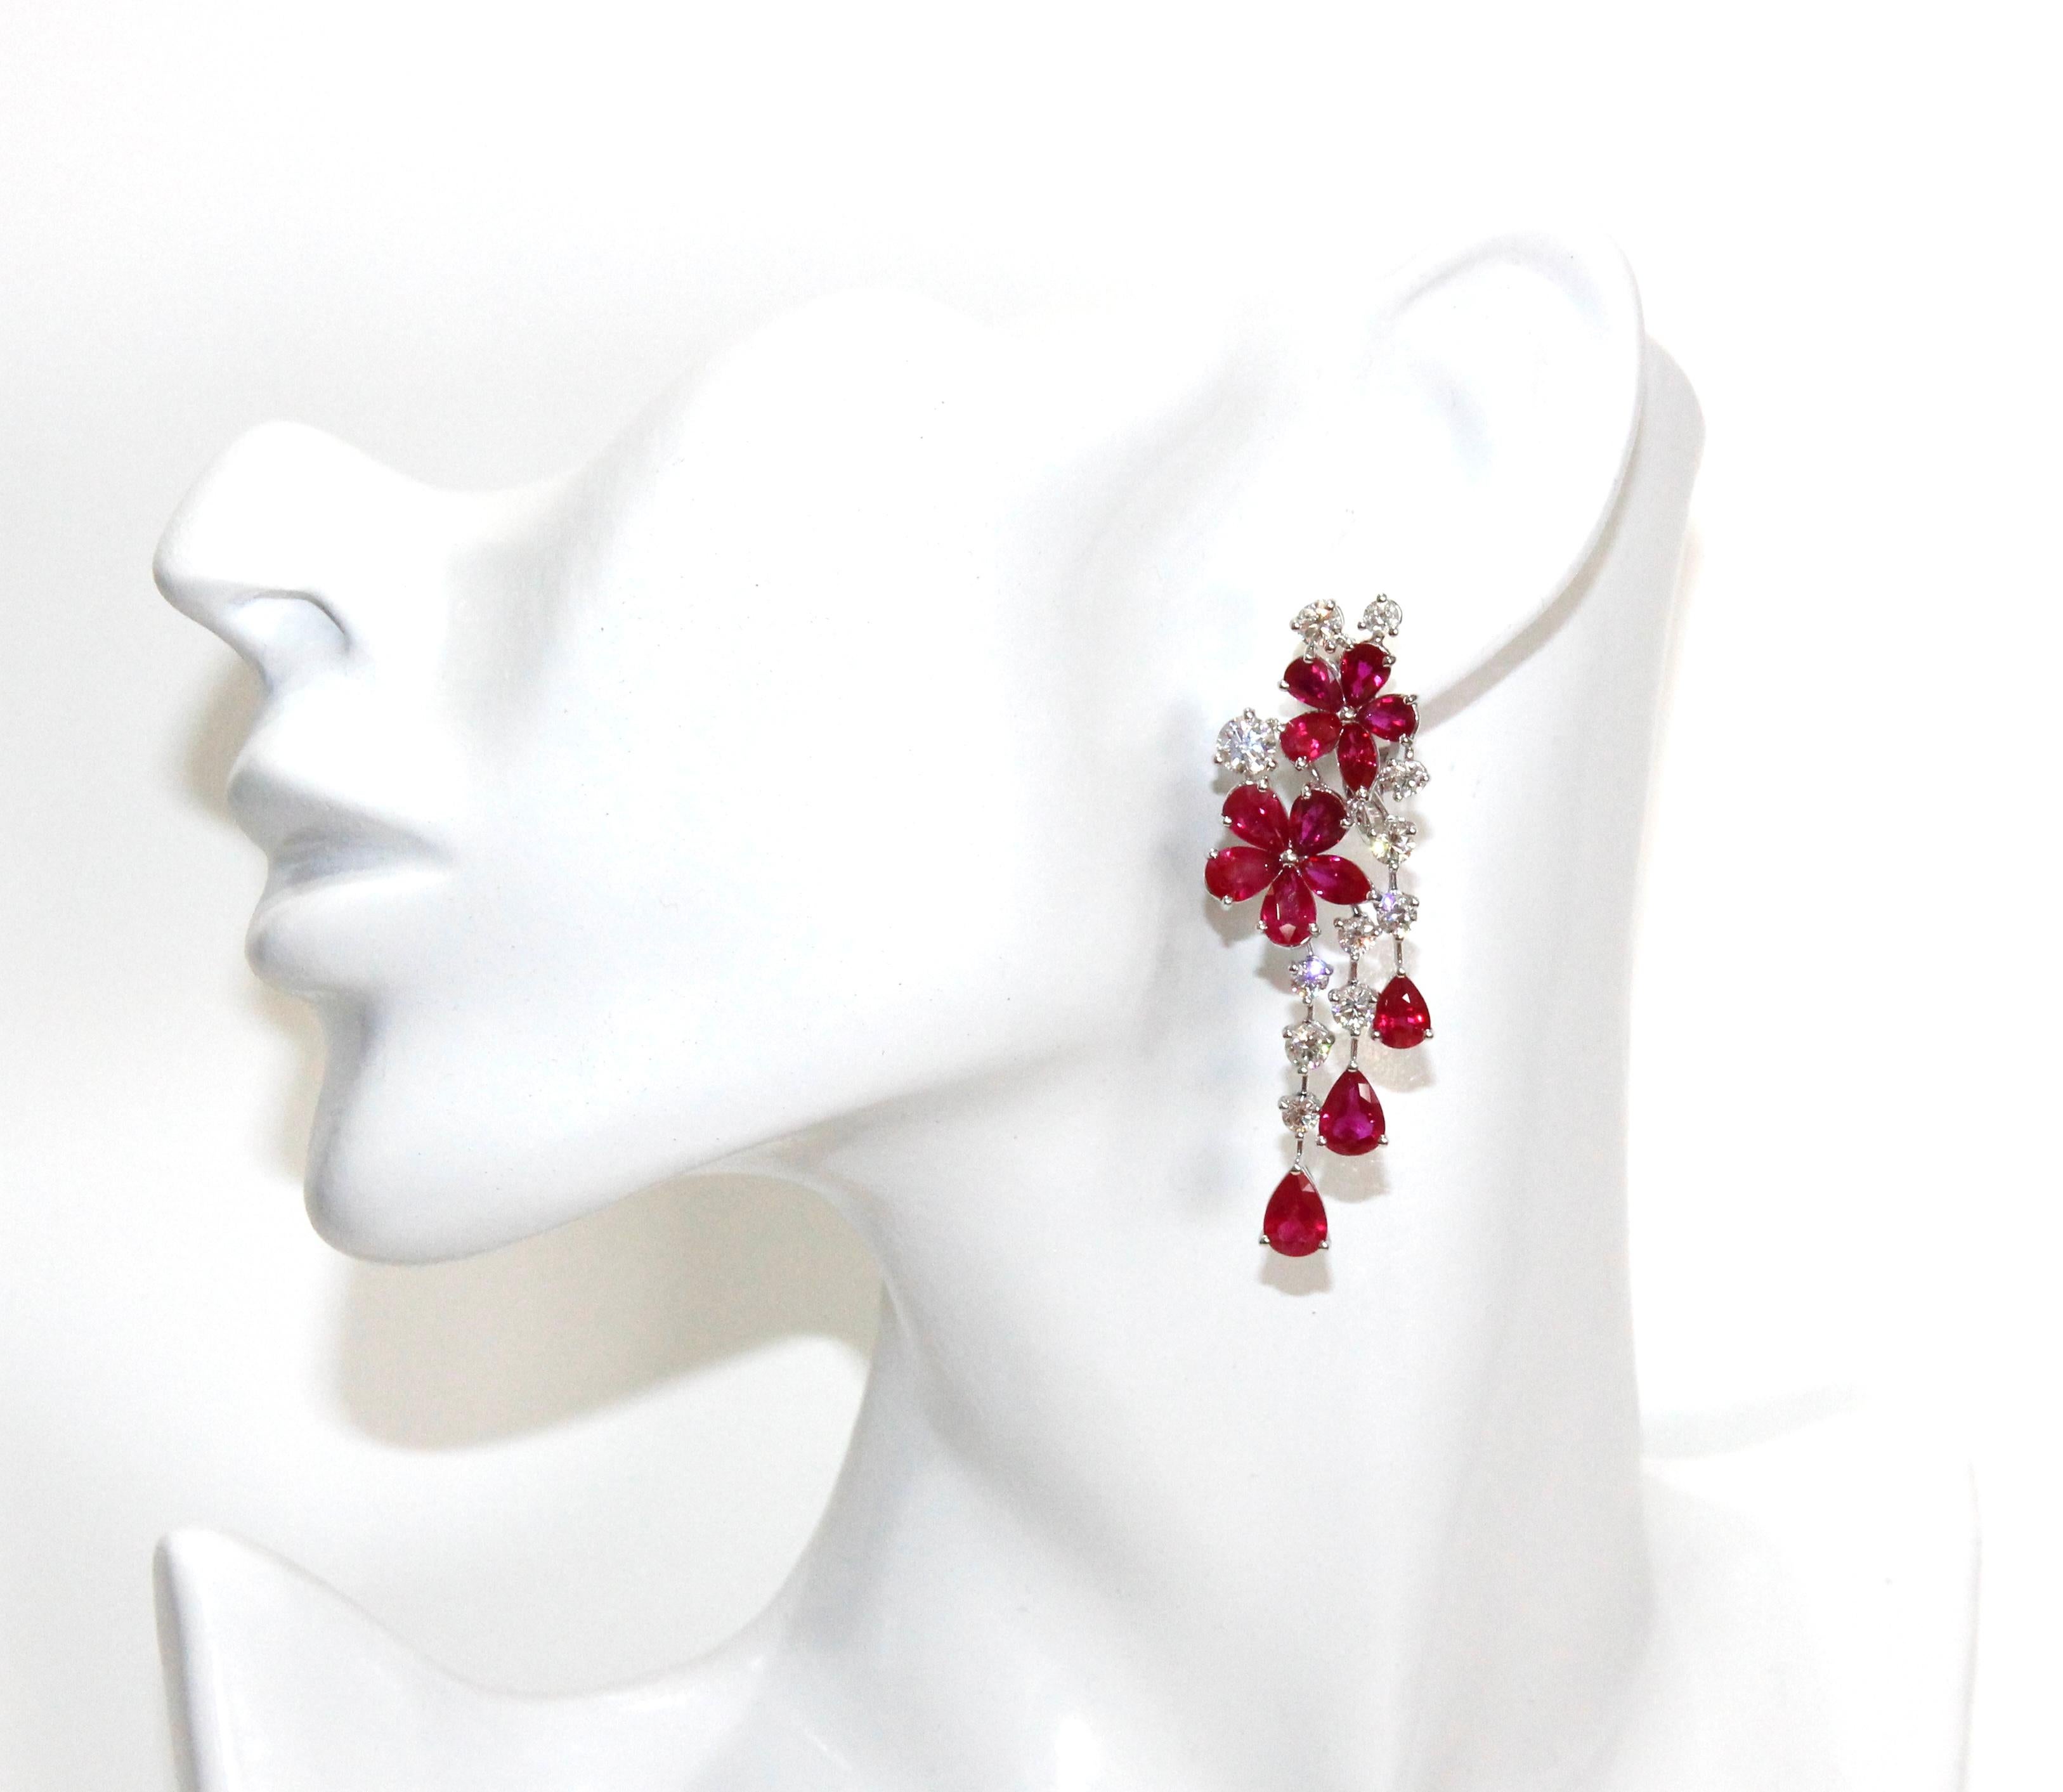 Graff Multi-Shape Ruby and White Diamond Double Flower Carissa Earrings.

22 White Round Diamonds (4cts Total)
22 Pear Shaped Rubies (18cts Total) 
4 Marquise Rubies (2.5cts Total) 
Retail: $180,000.00 